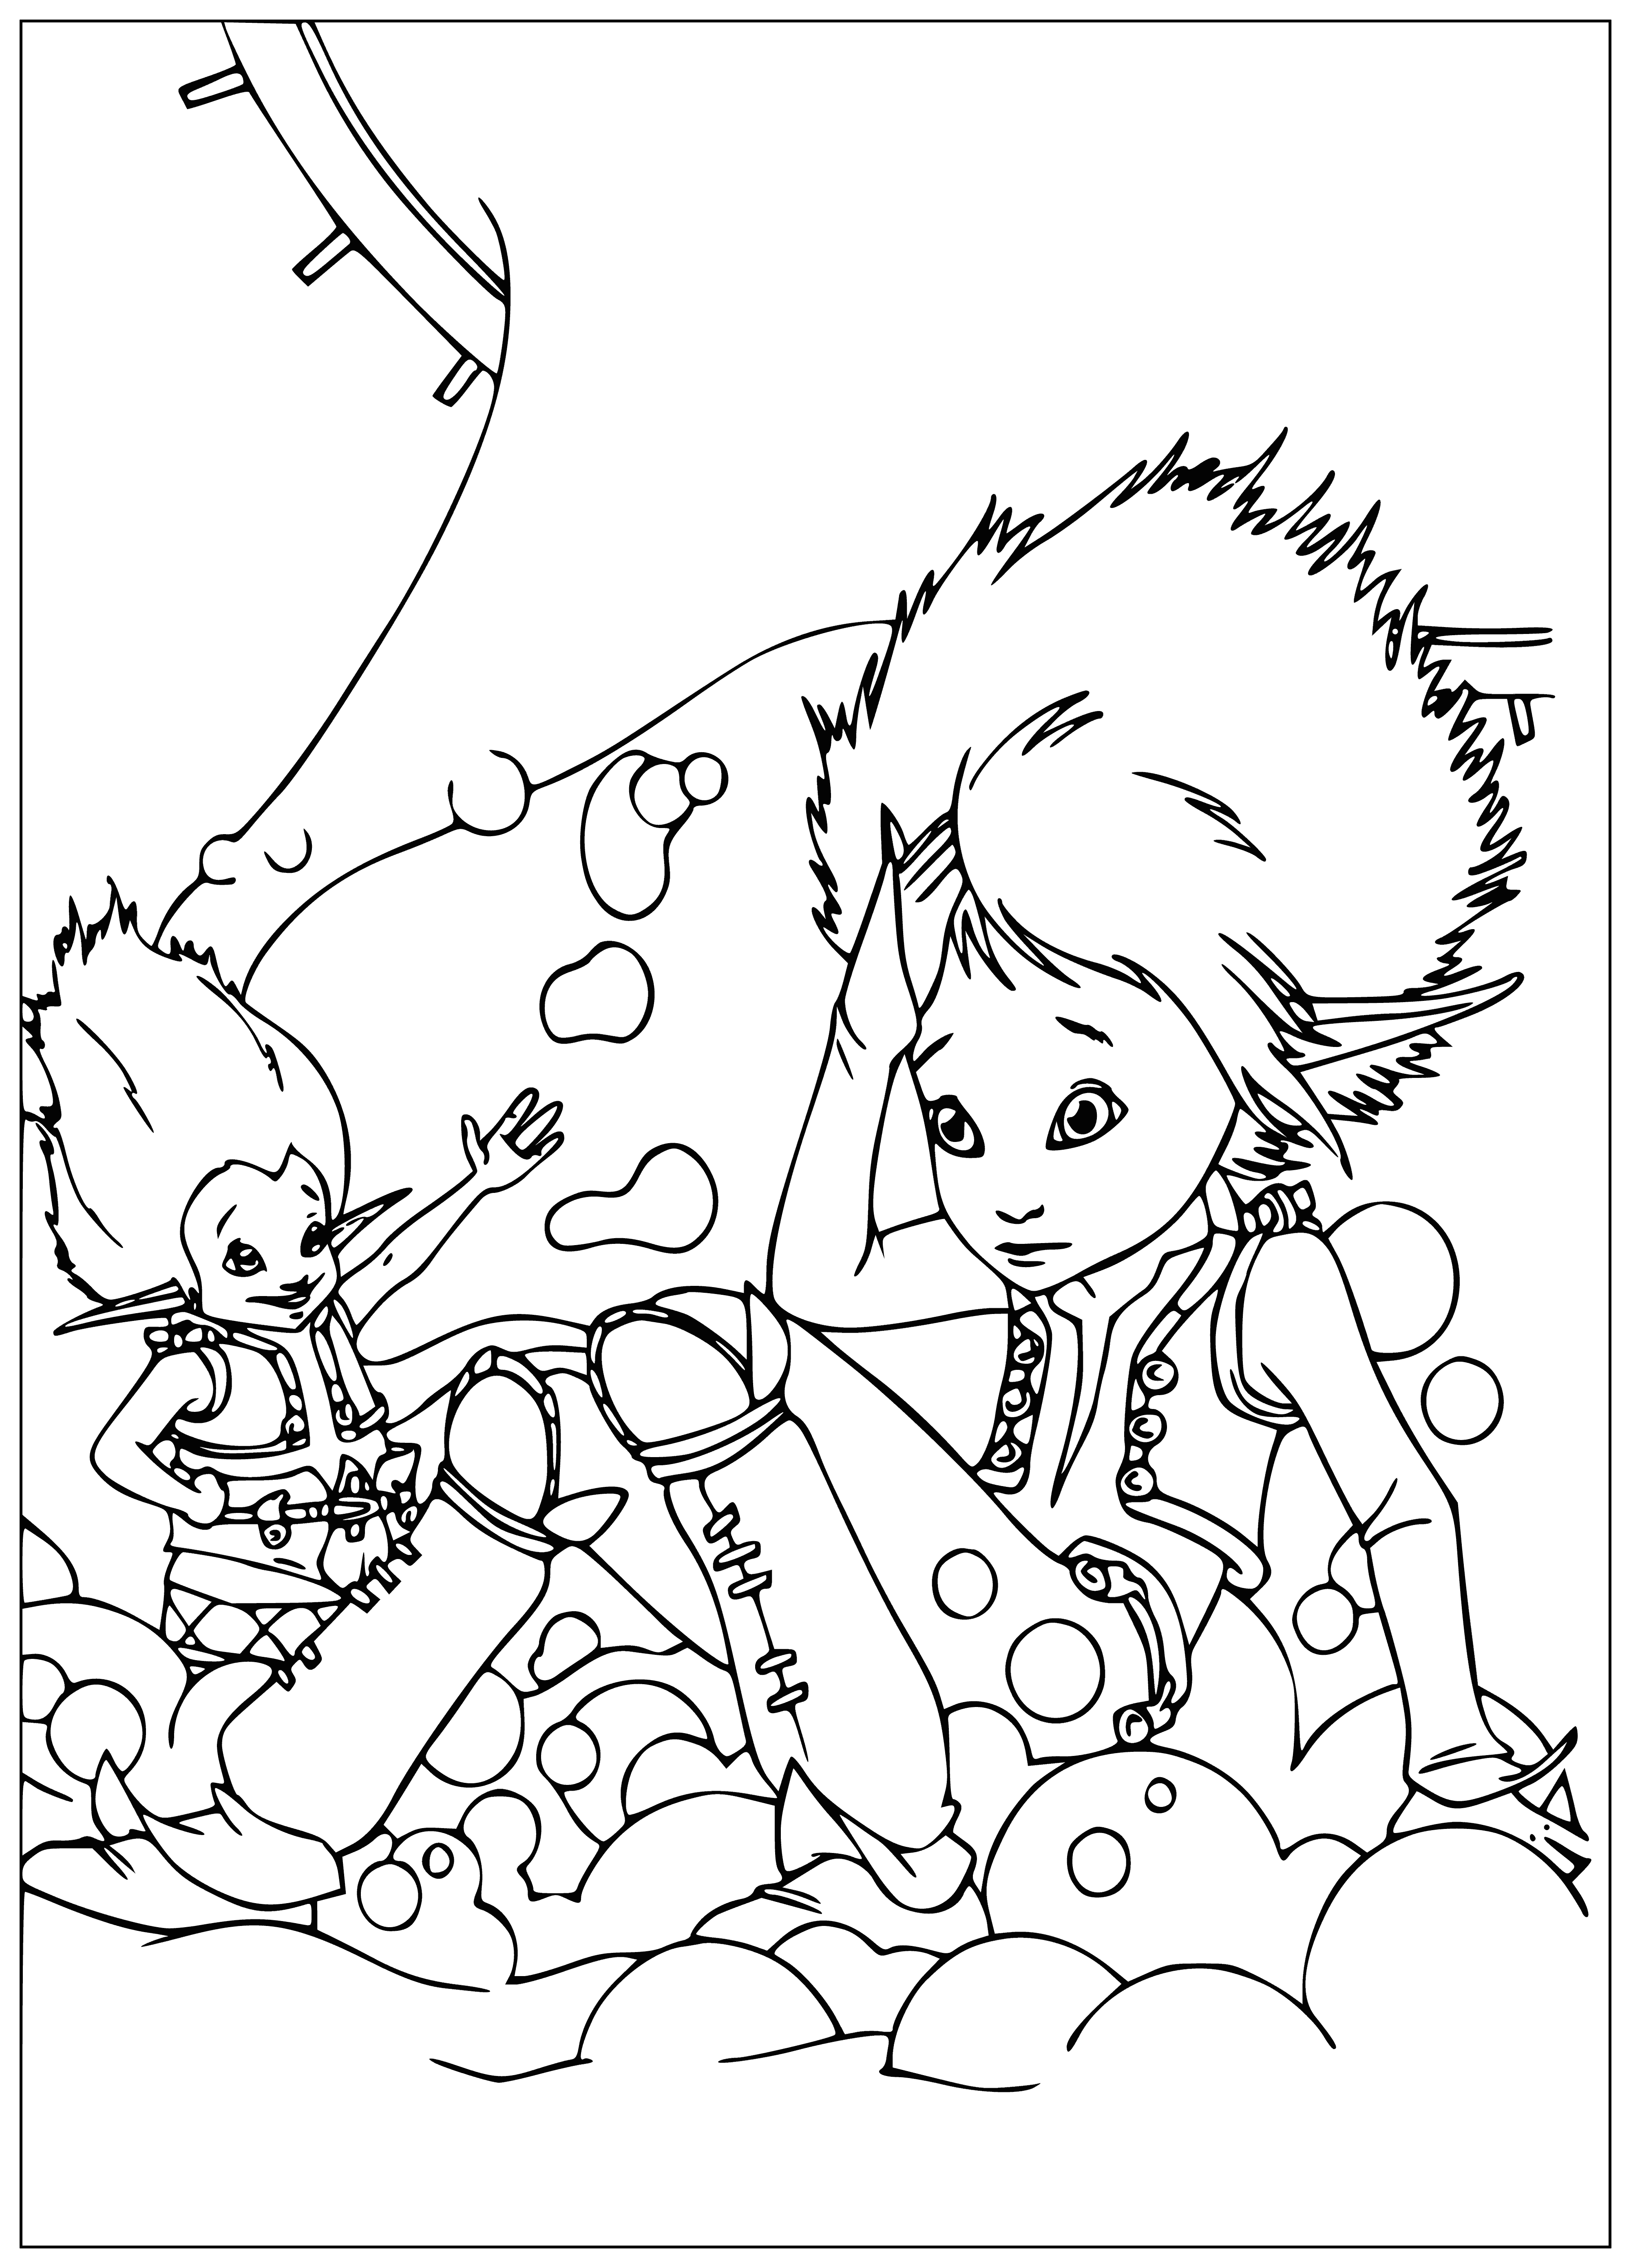 coloring page: Two characters in an underground cavern. Arthur, a boy, looks tired, and Barakhlyush, a green creature, helps him. #colorpage #tired #help